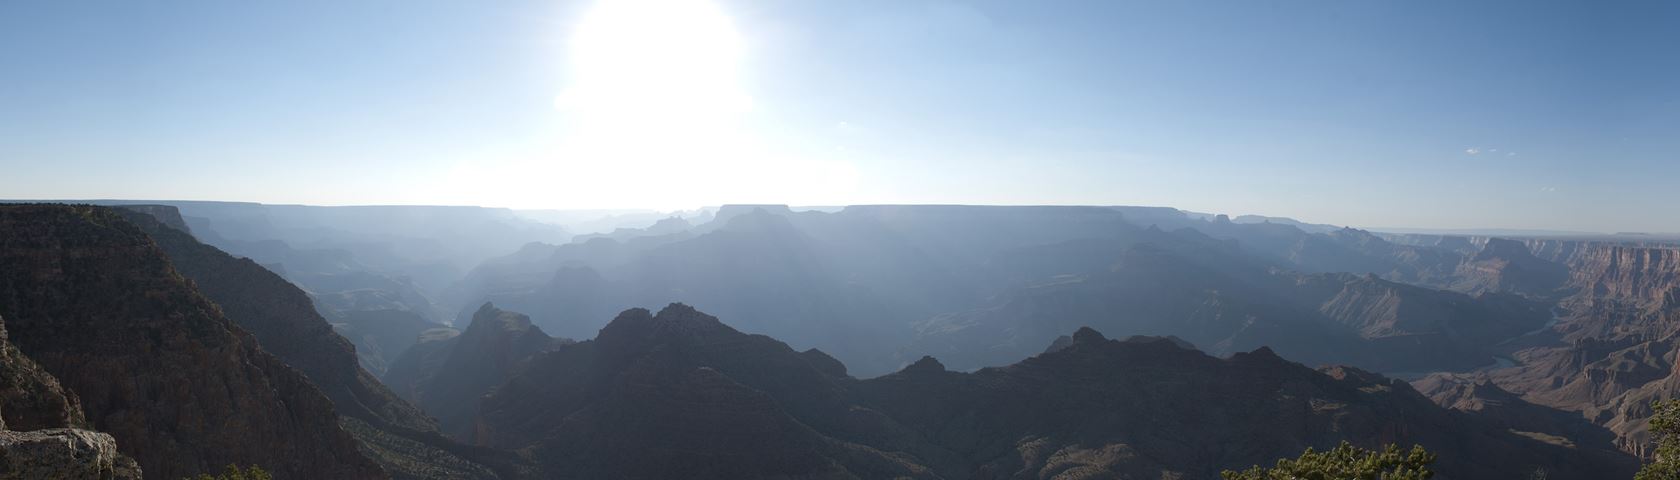 Grand Canyon Afternoon